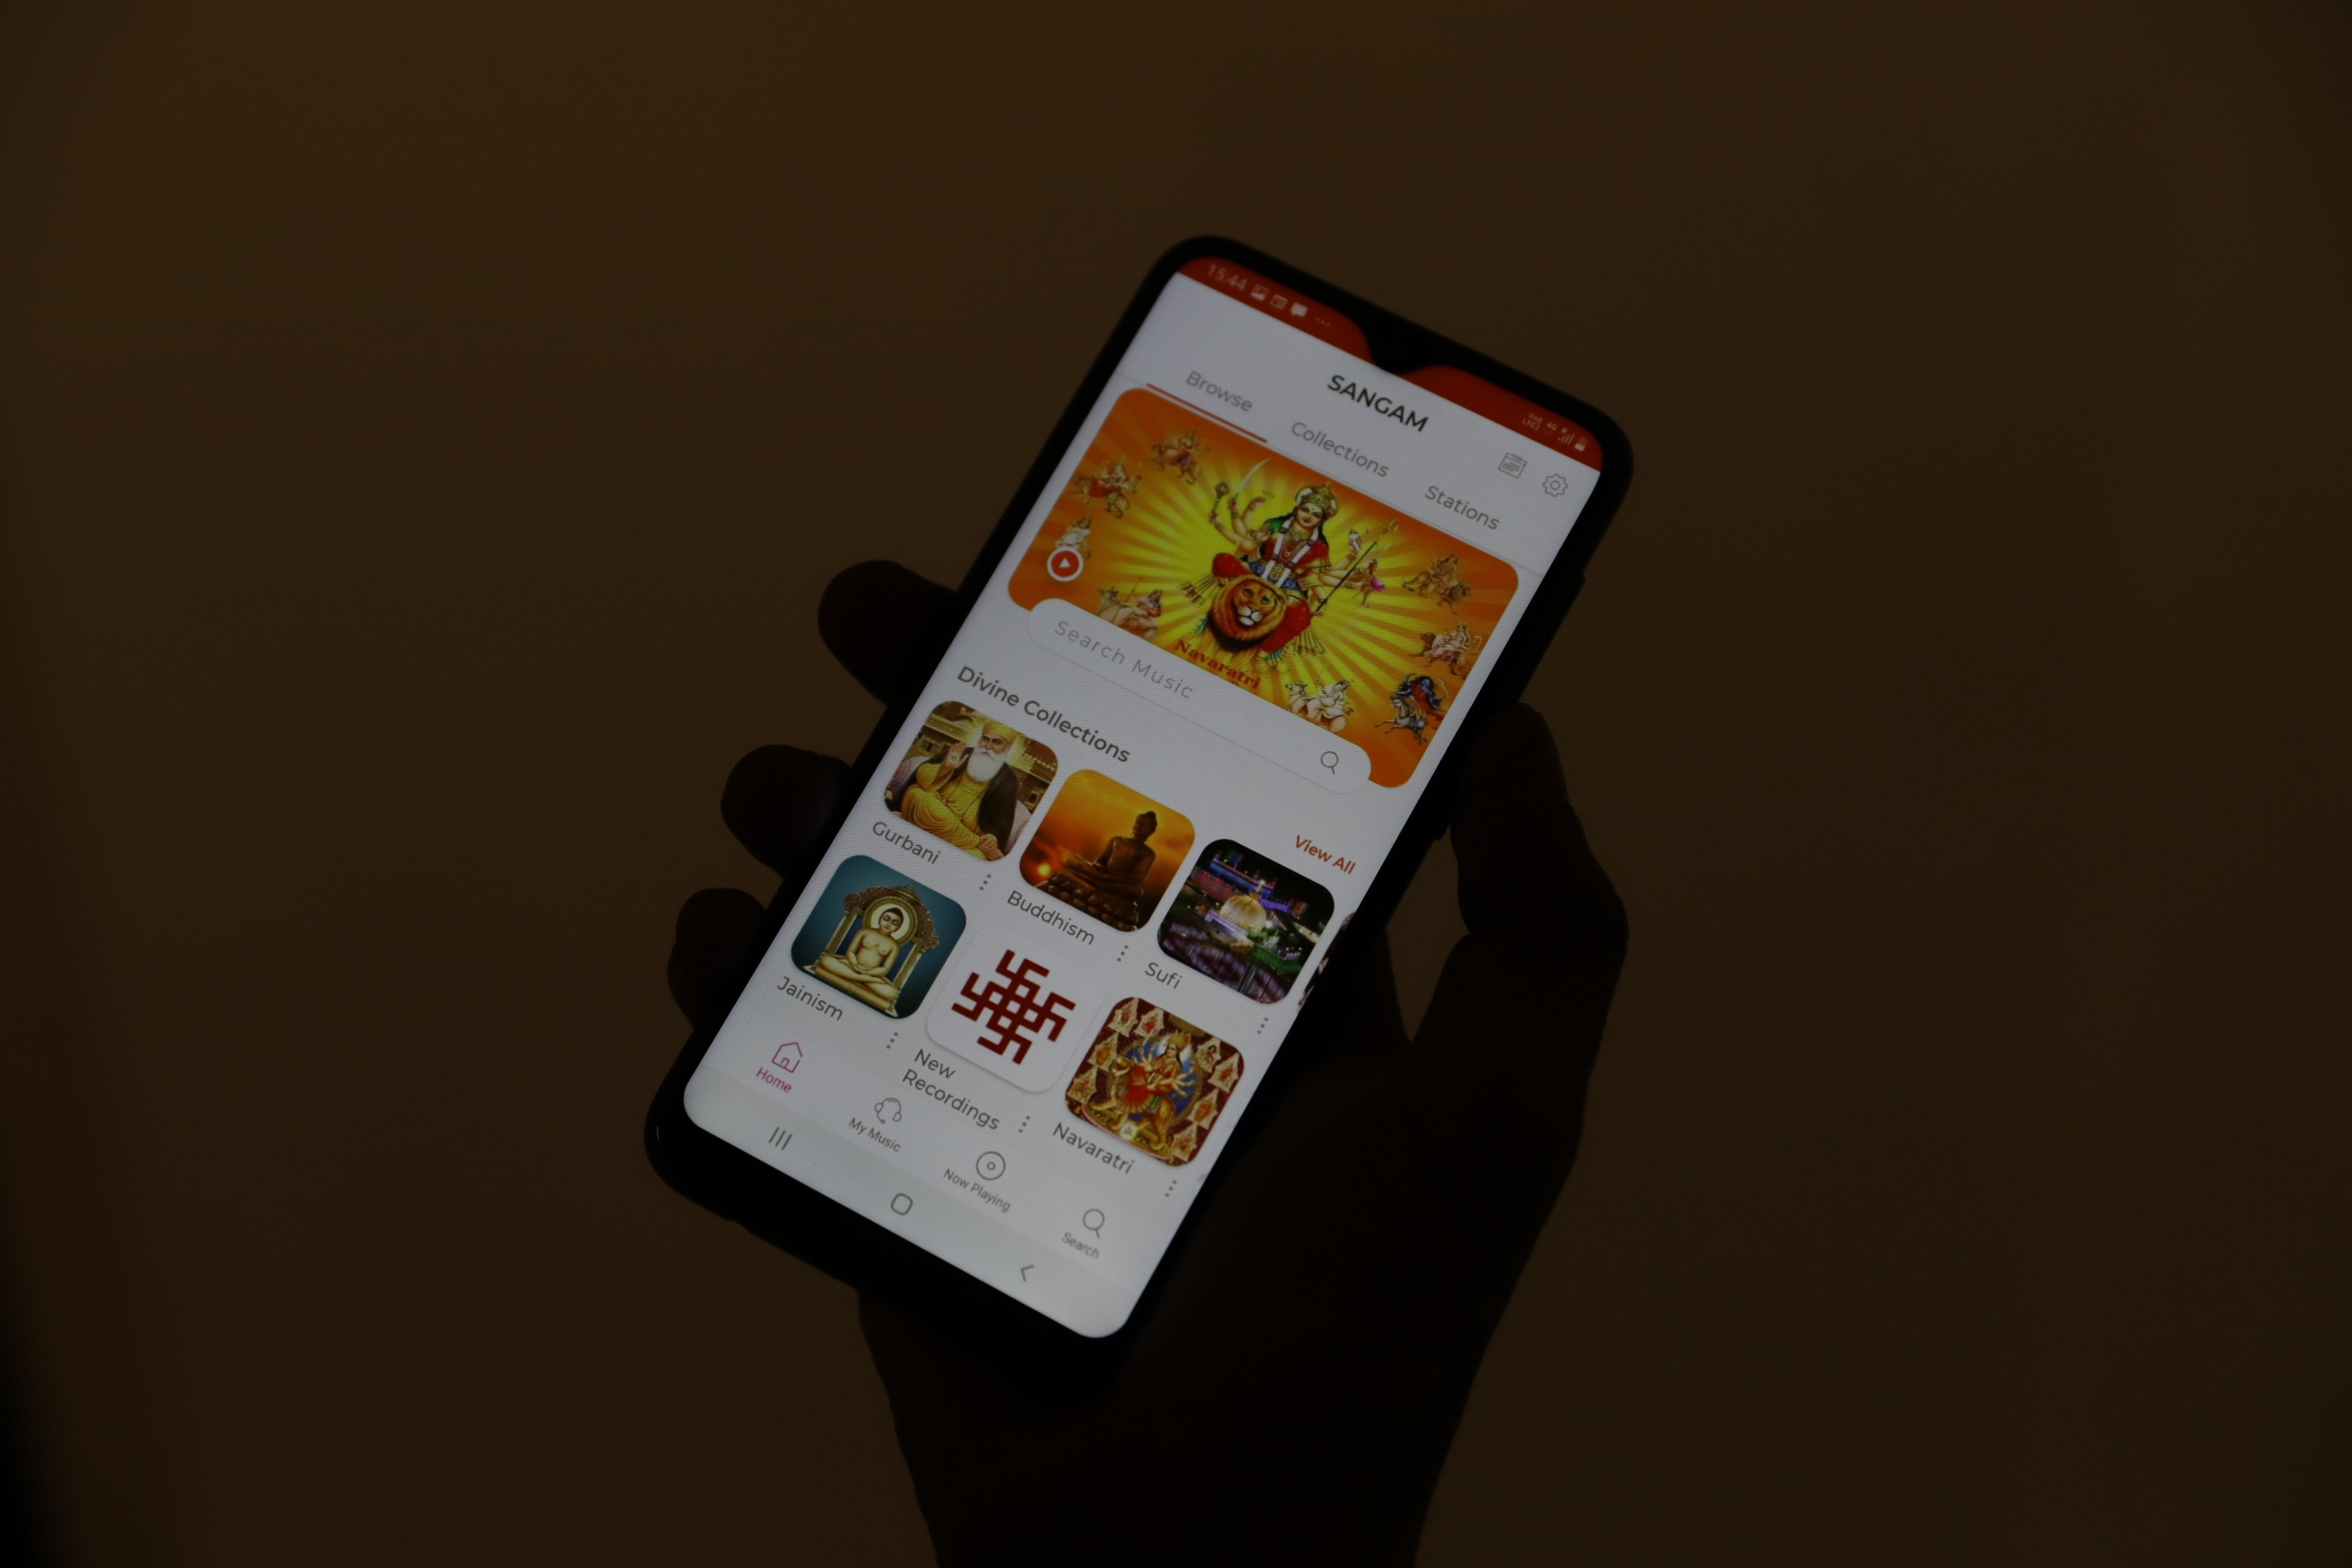 The government’s music app Sangam treats Hinduism as the “core of Indian culture”